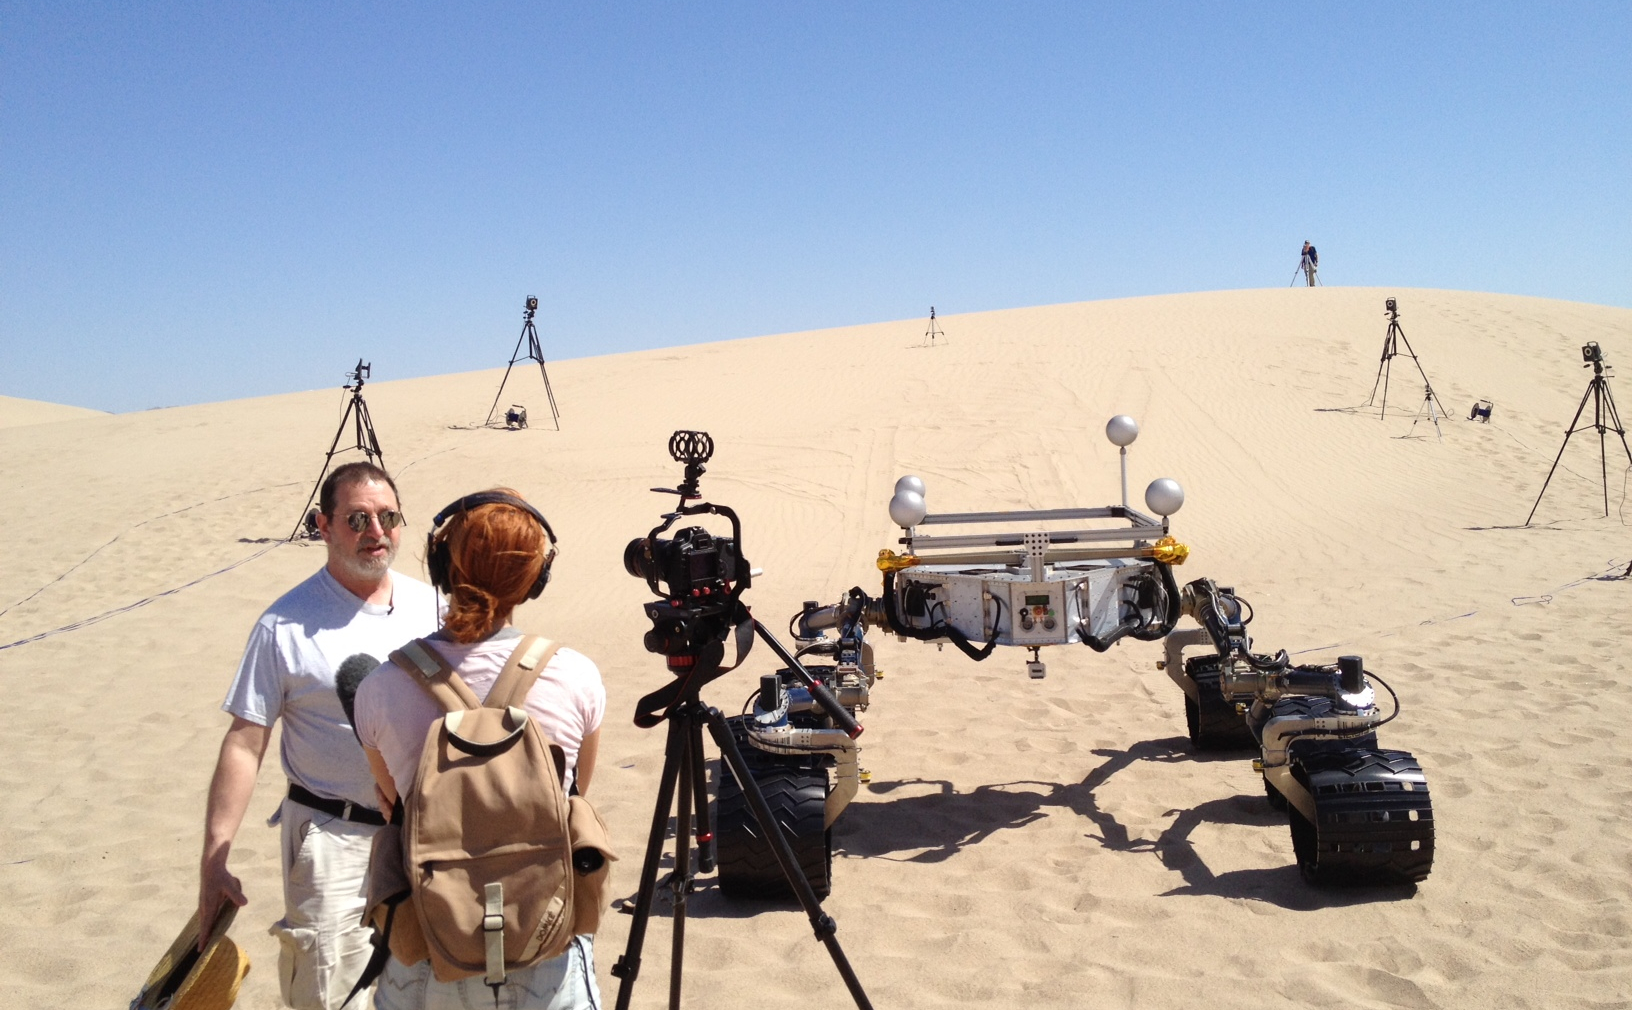 Watching Test Drives in California for Rover Mission to Mars